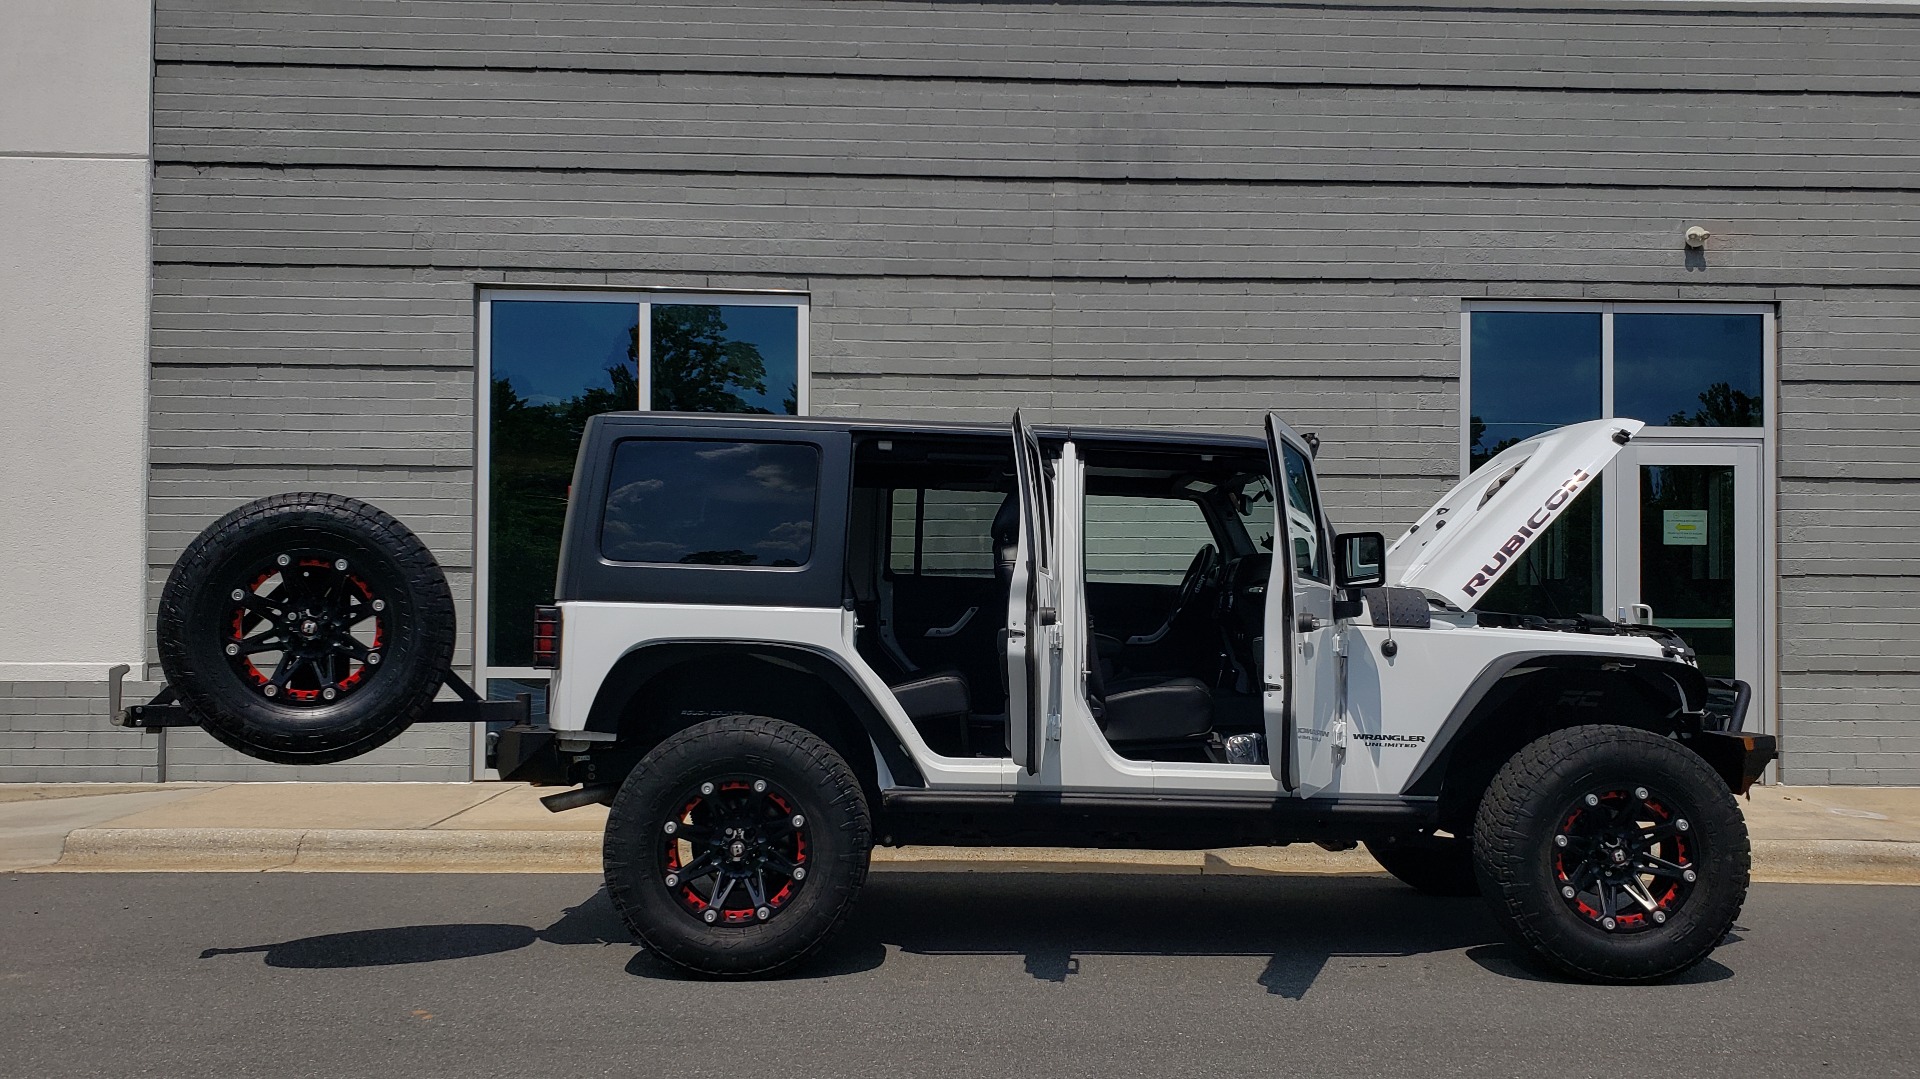 Used 2017 Jeep WRANGLER UNLIMITED RUBICON HARD ROCK 4X4 / 3.6L V6 / 5-SPD AUTO / NAV / REMOTE START for sale Sold at Formula Imports in Charlotte NC 28227 21